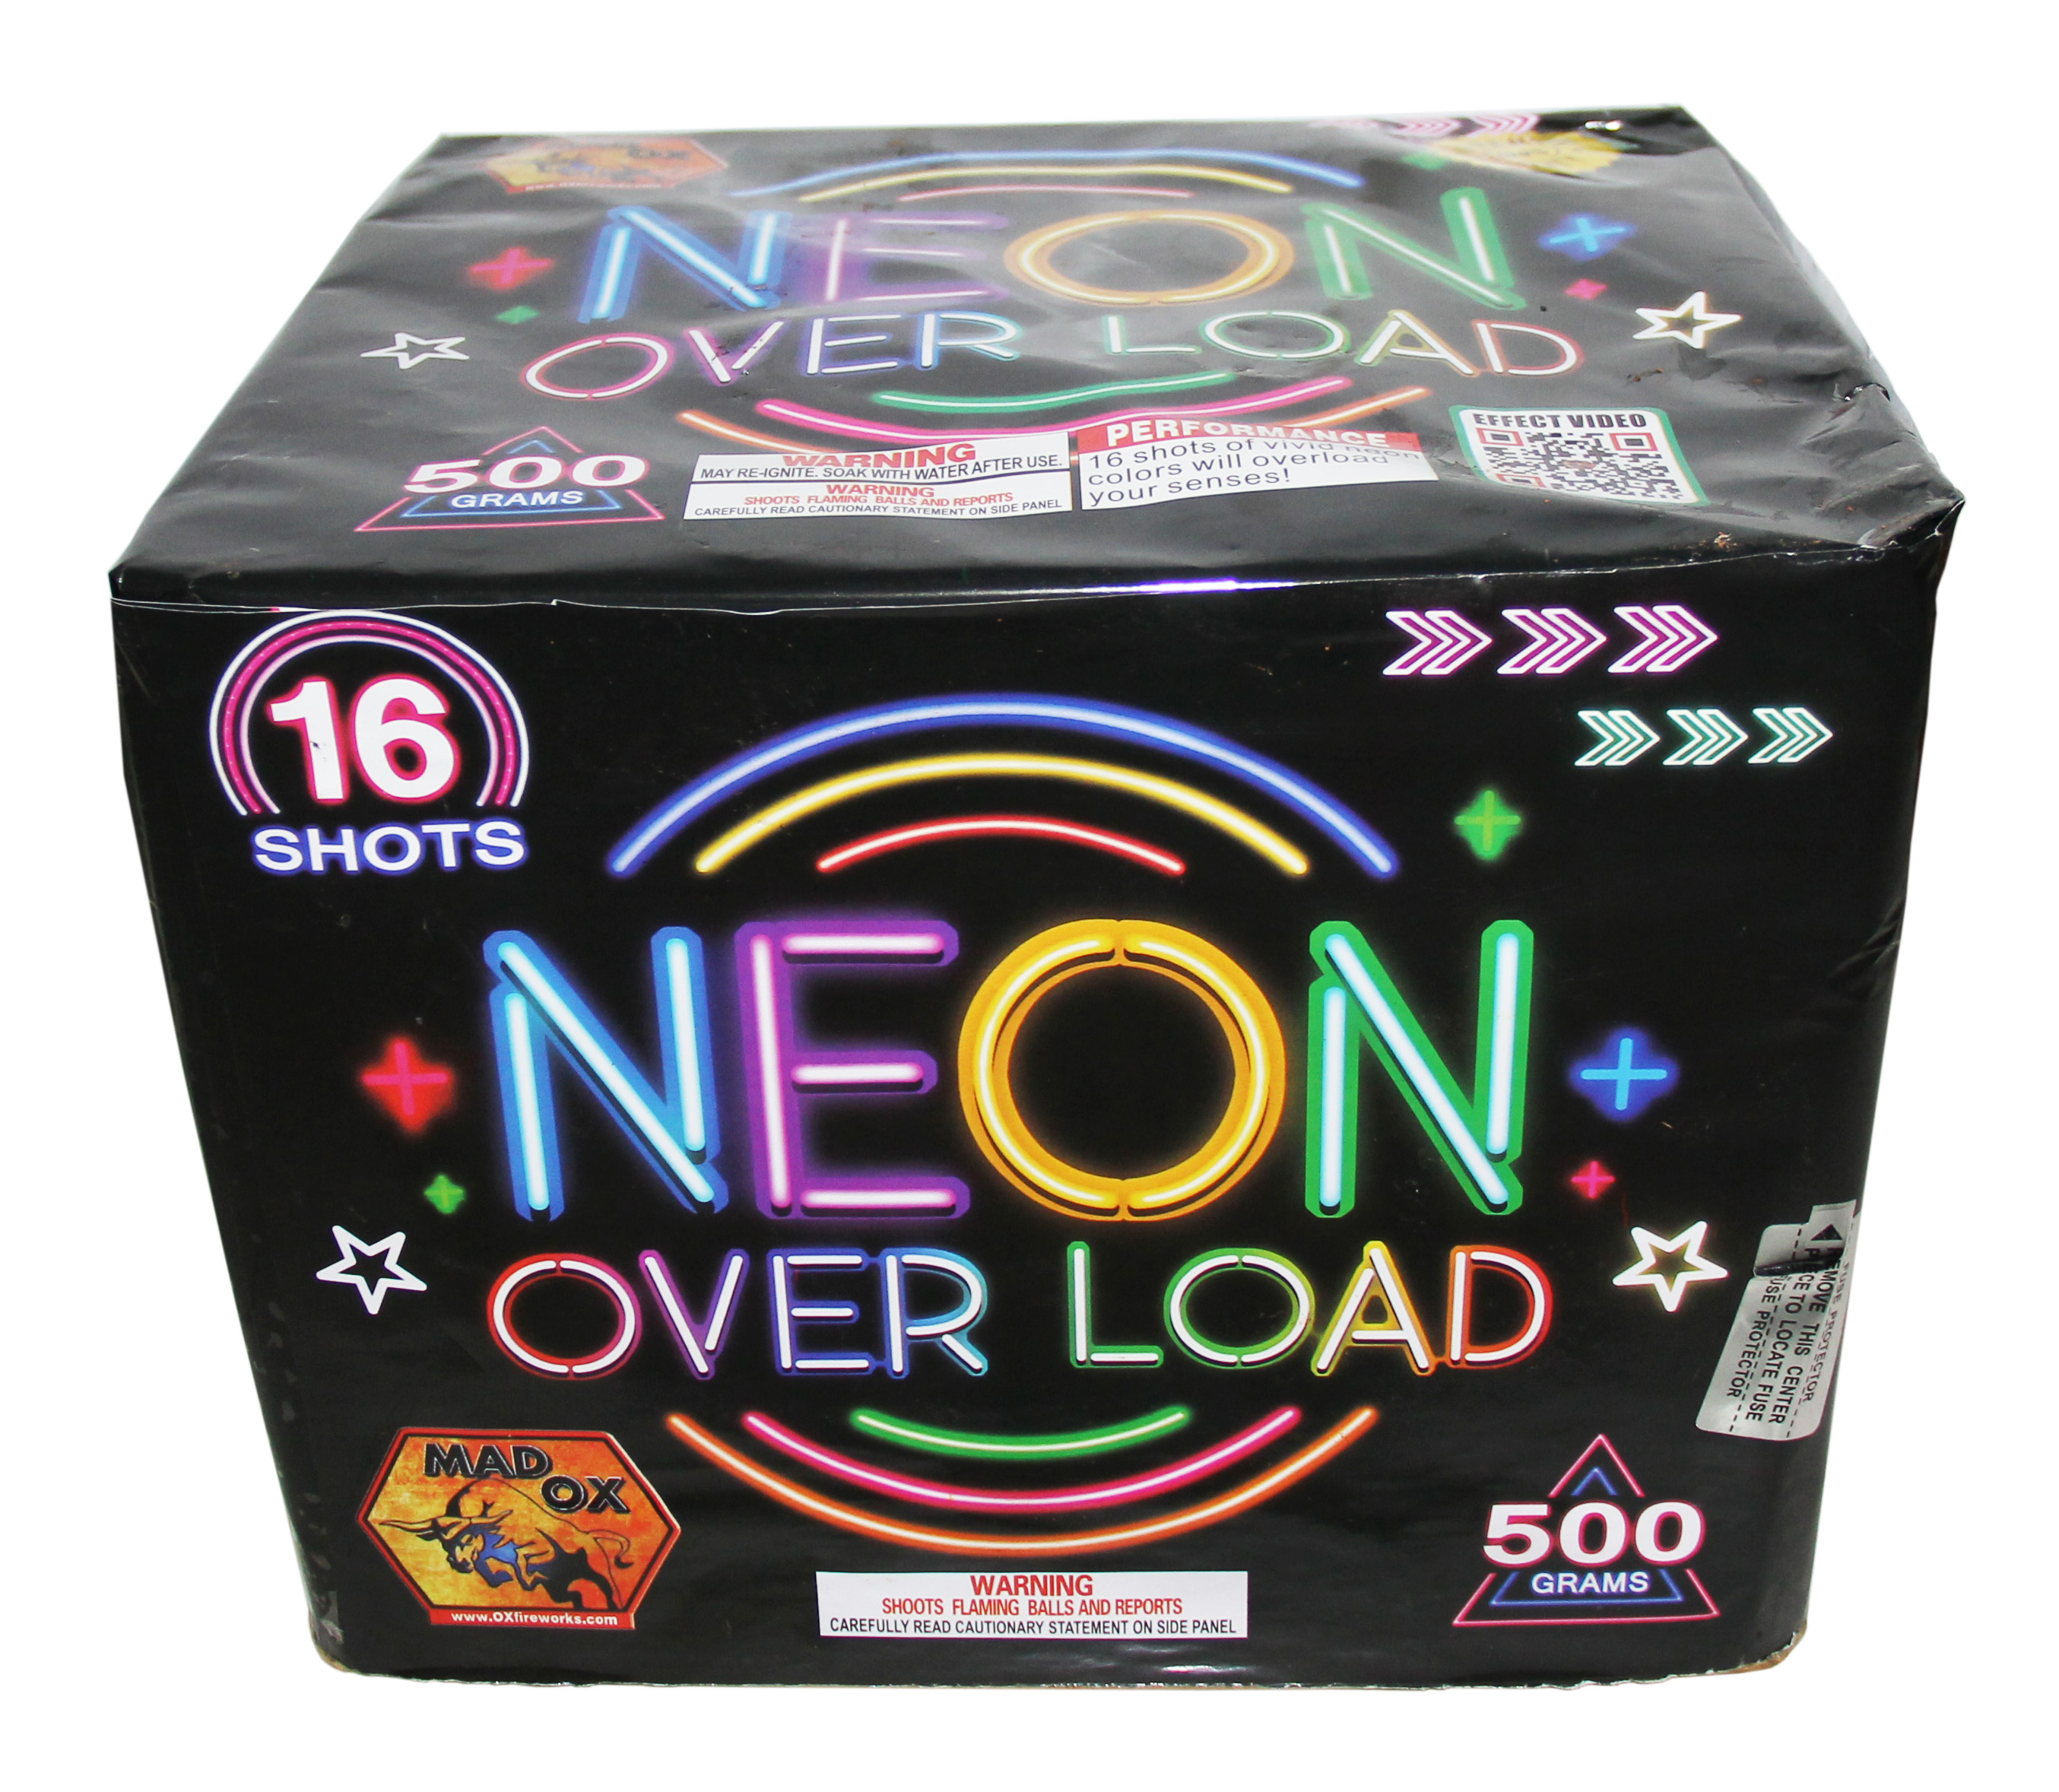 Neon Over Load